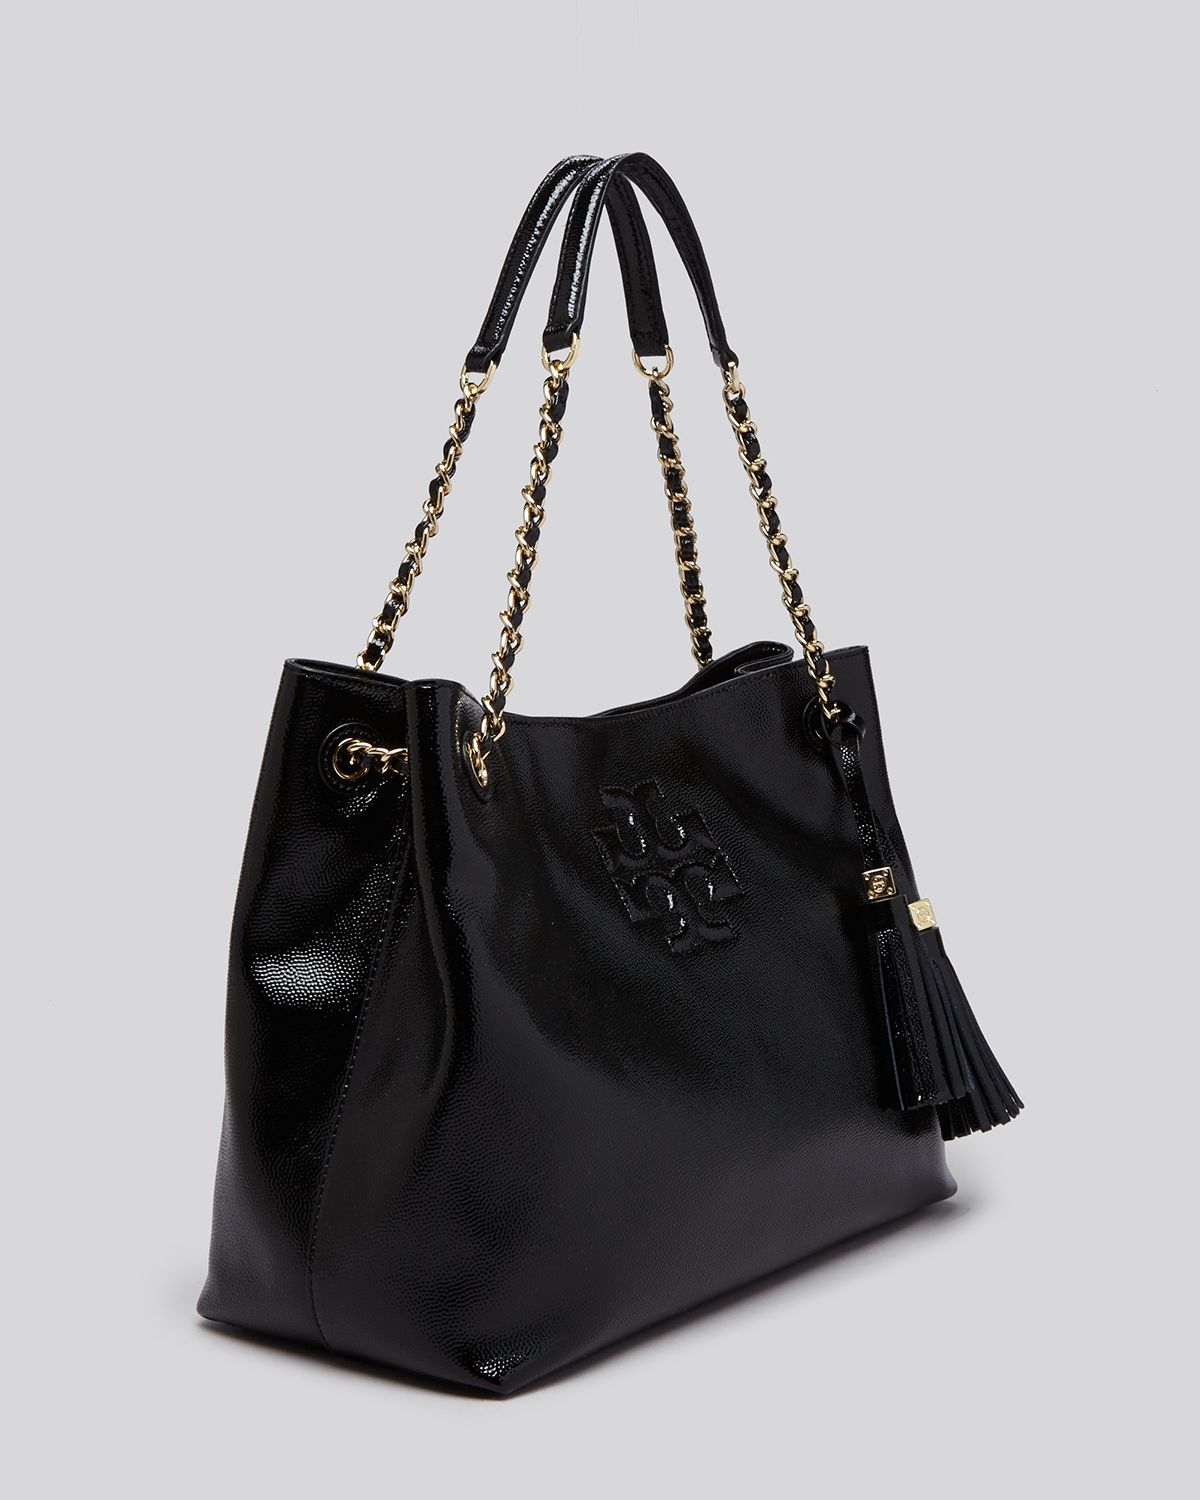 Tory Burch Tote - Thea Patent Chain Shoulder Slouchy in Black | Lyst